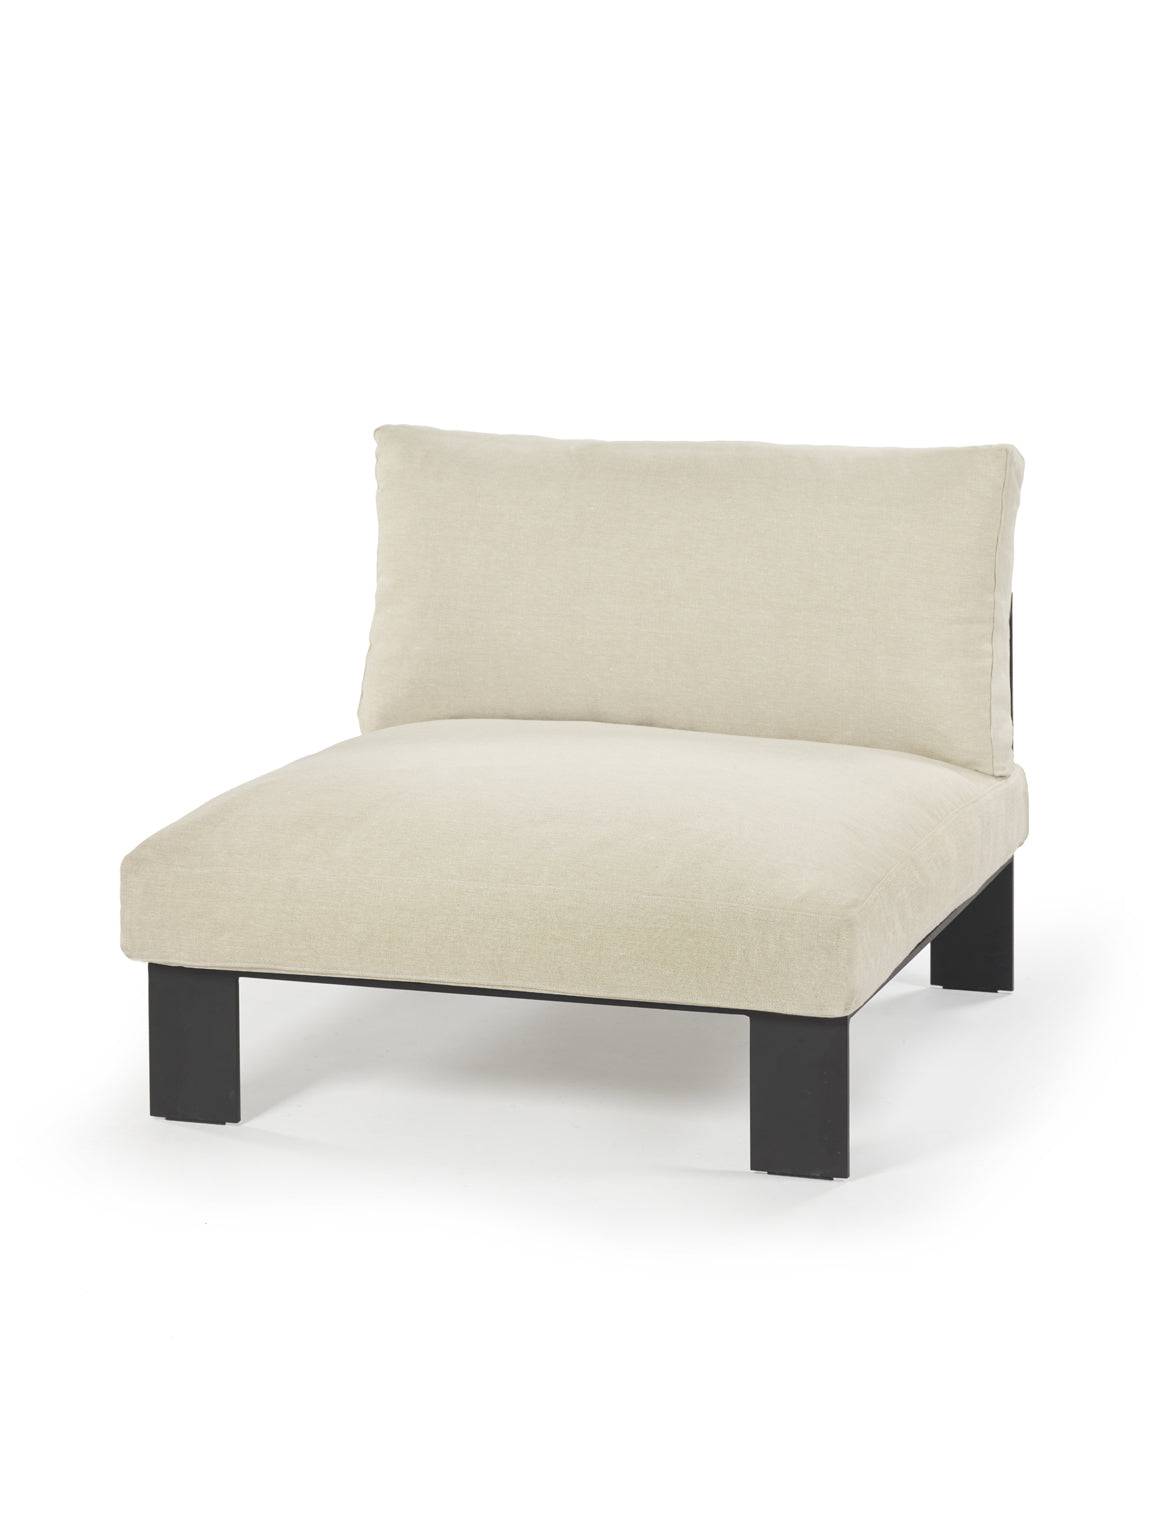 Mombaers Lounge Chair - Ivory - THAT COOL LIVING